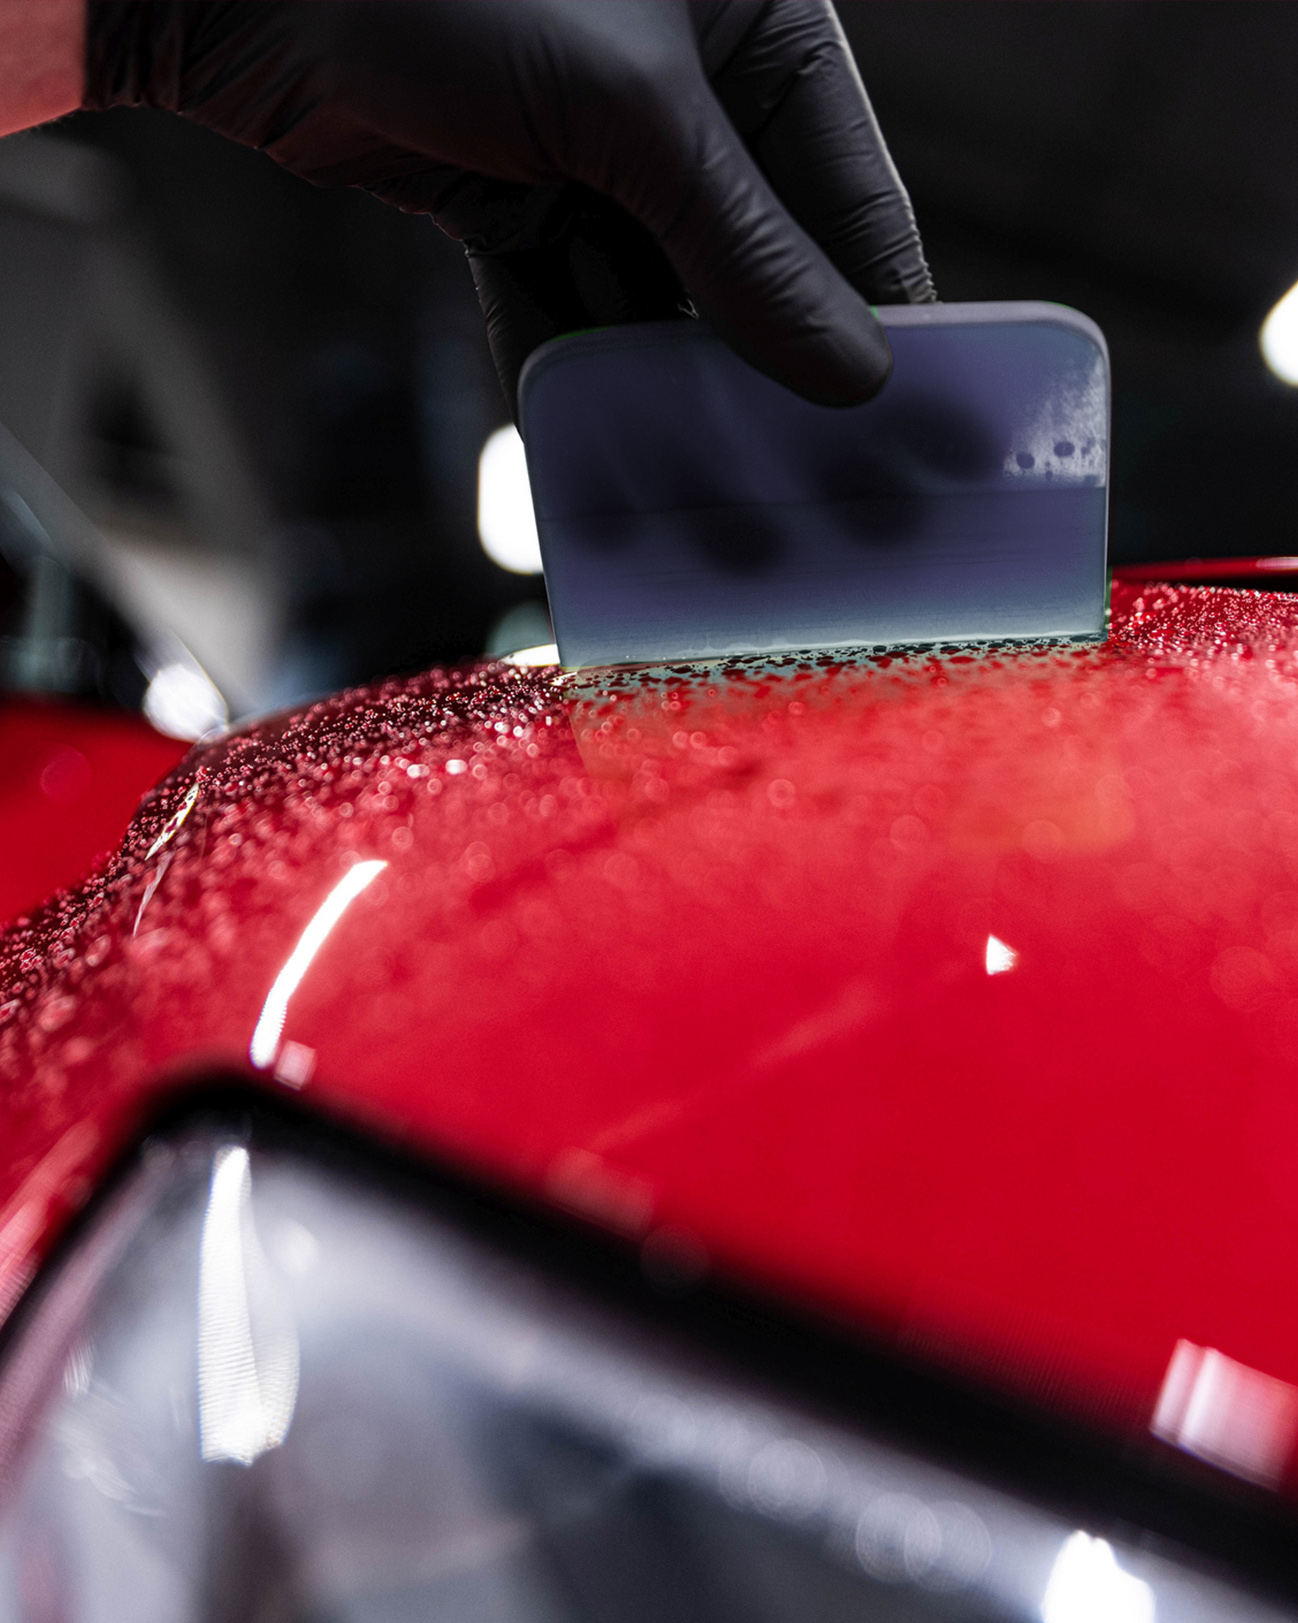 Employee of a car wash or car detailing studio applies a ceramic coating to the paintwork of a red car